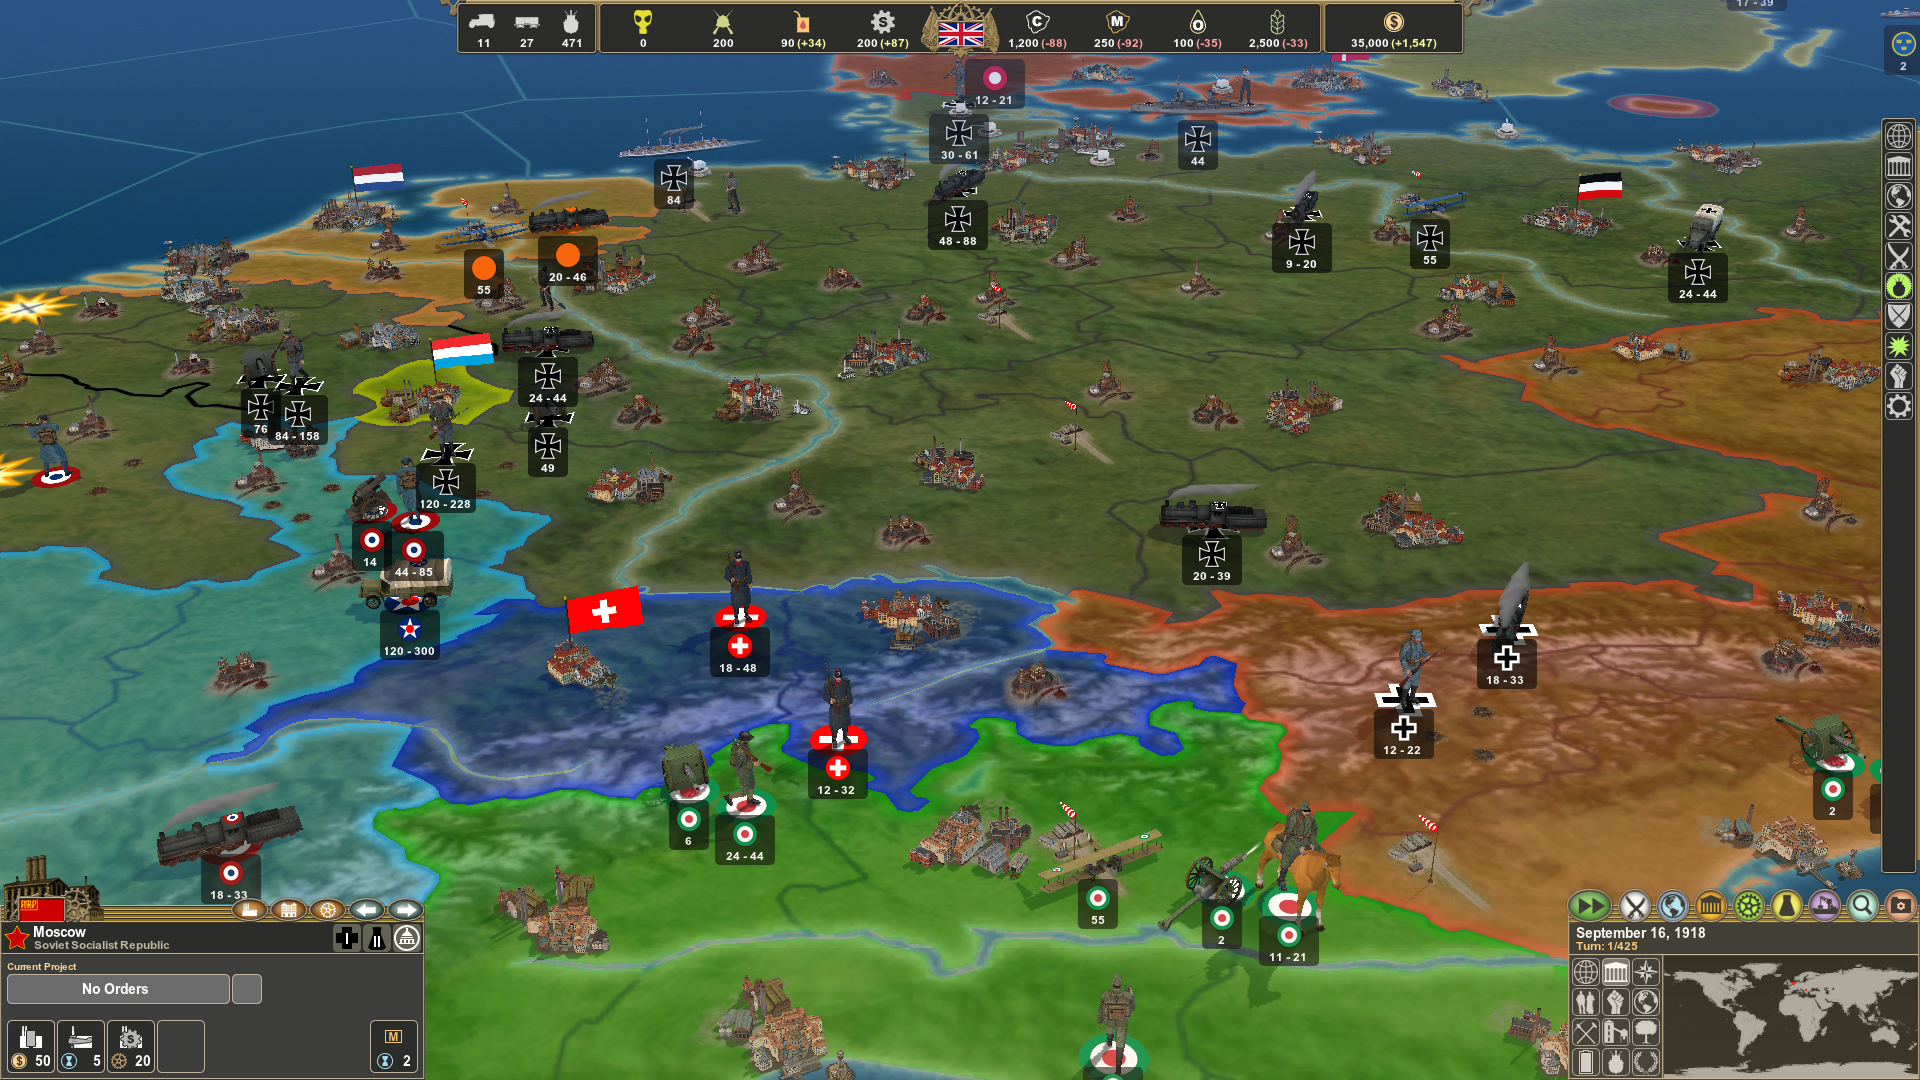 Making History: The Great War - The Red Army screenshot